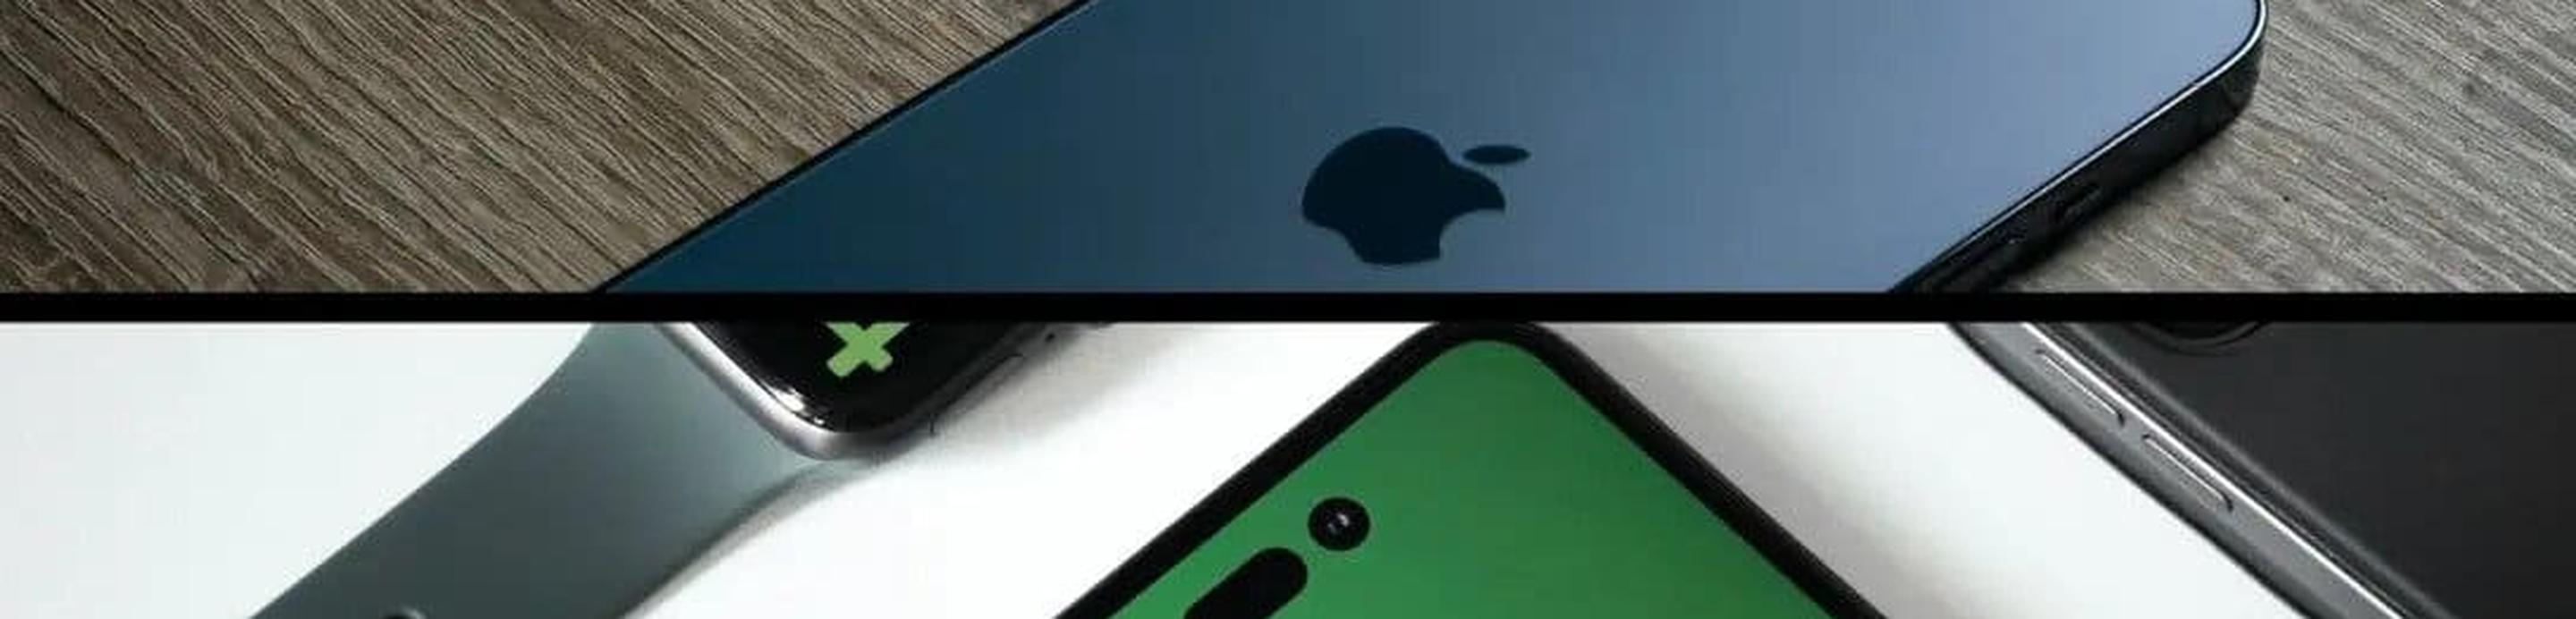 iphone 13 and 14